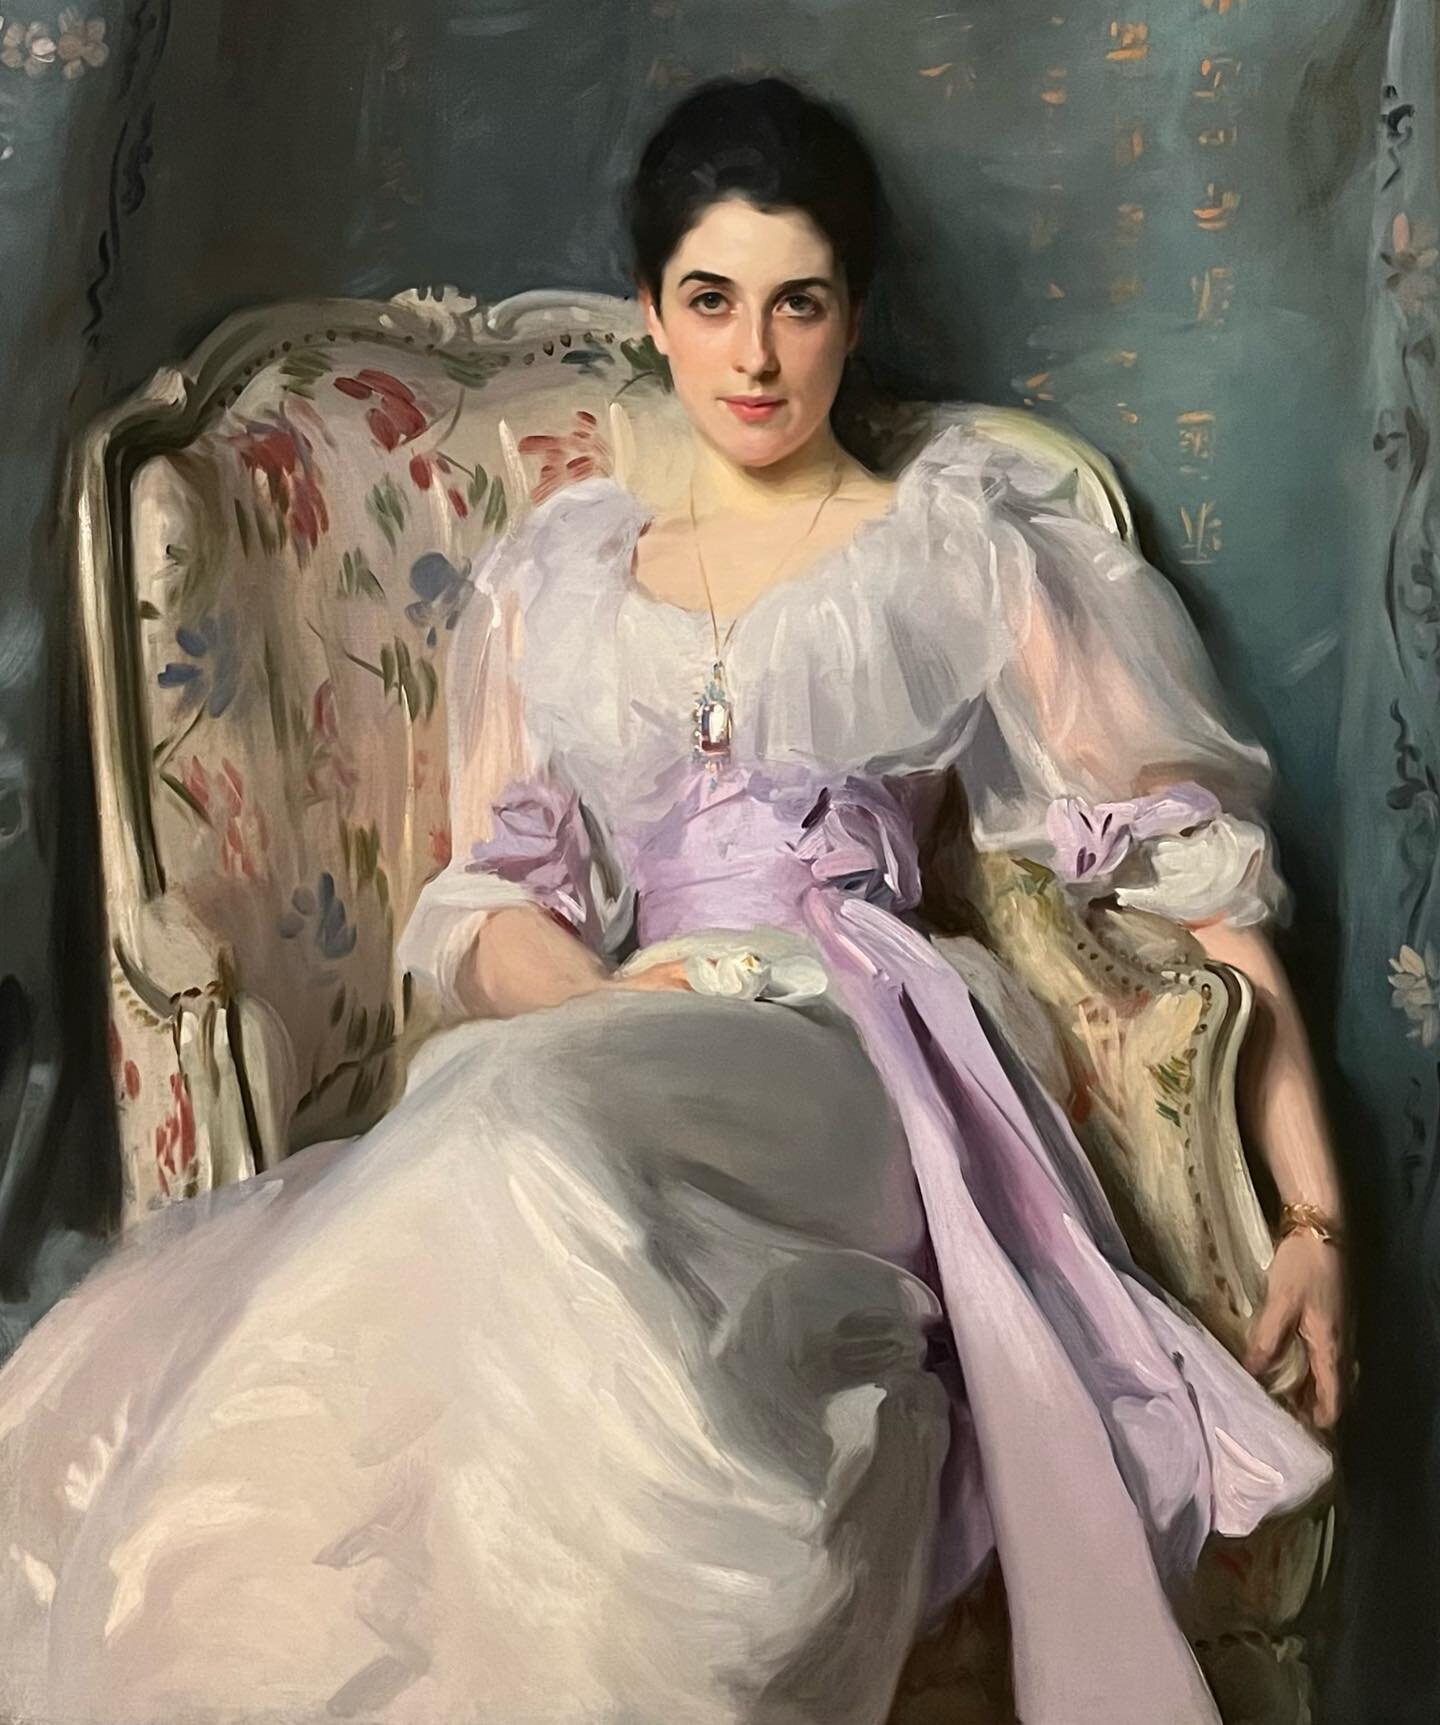 ✨ Sargent and Fashion ✨

I loved this exhibition at the Tate - its emphasis on Sargent&rsquo;s shapes and delight in material, and its inclusion of dresses and clothes by other makers. For @prospect_magazine I asked whether saying that a sitter&rsquo